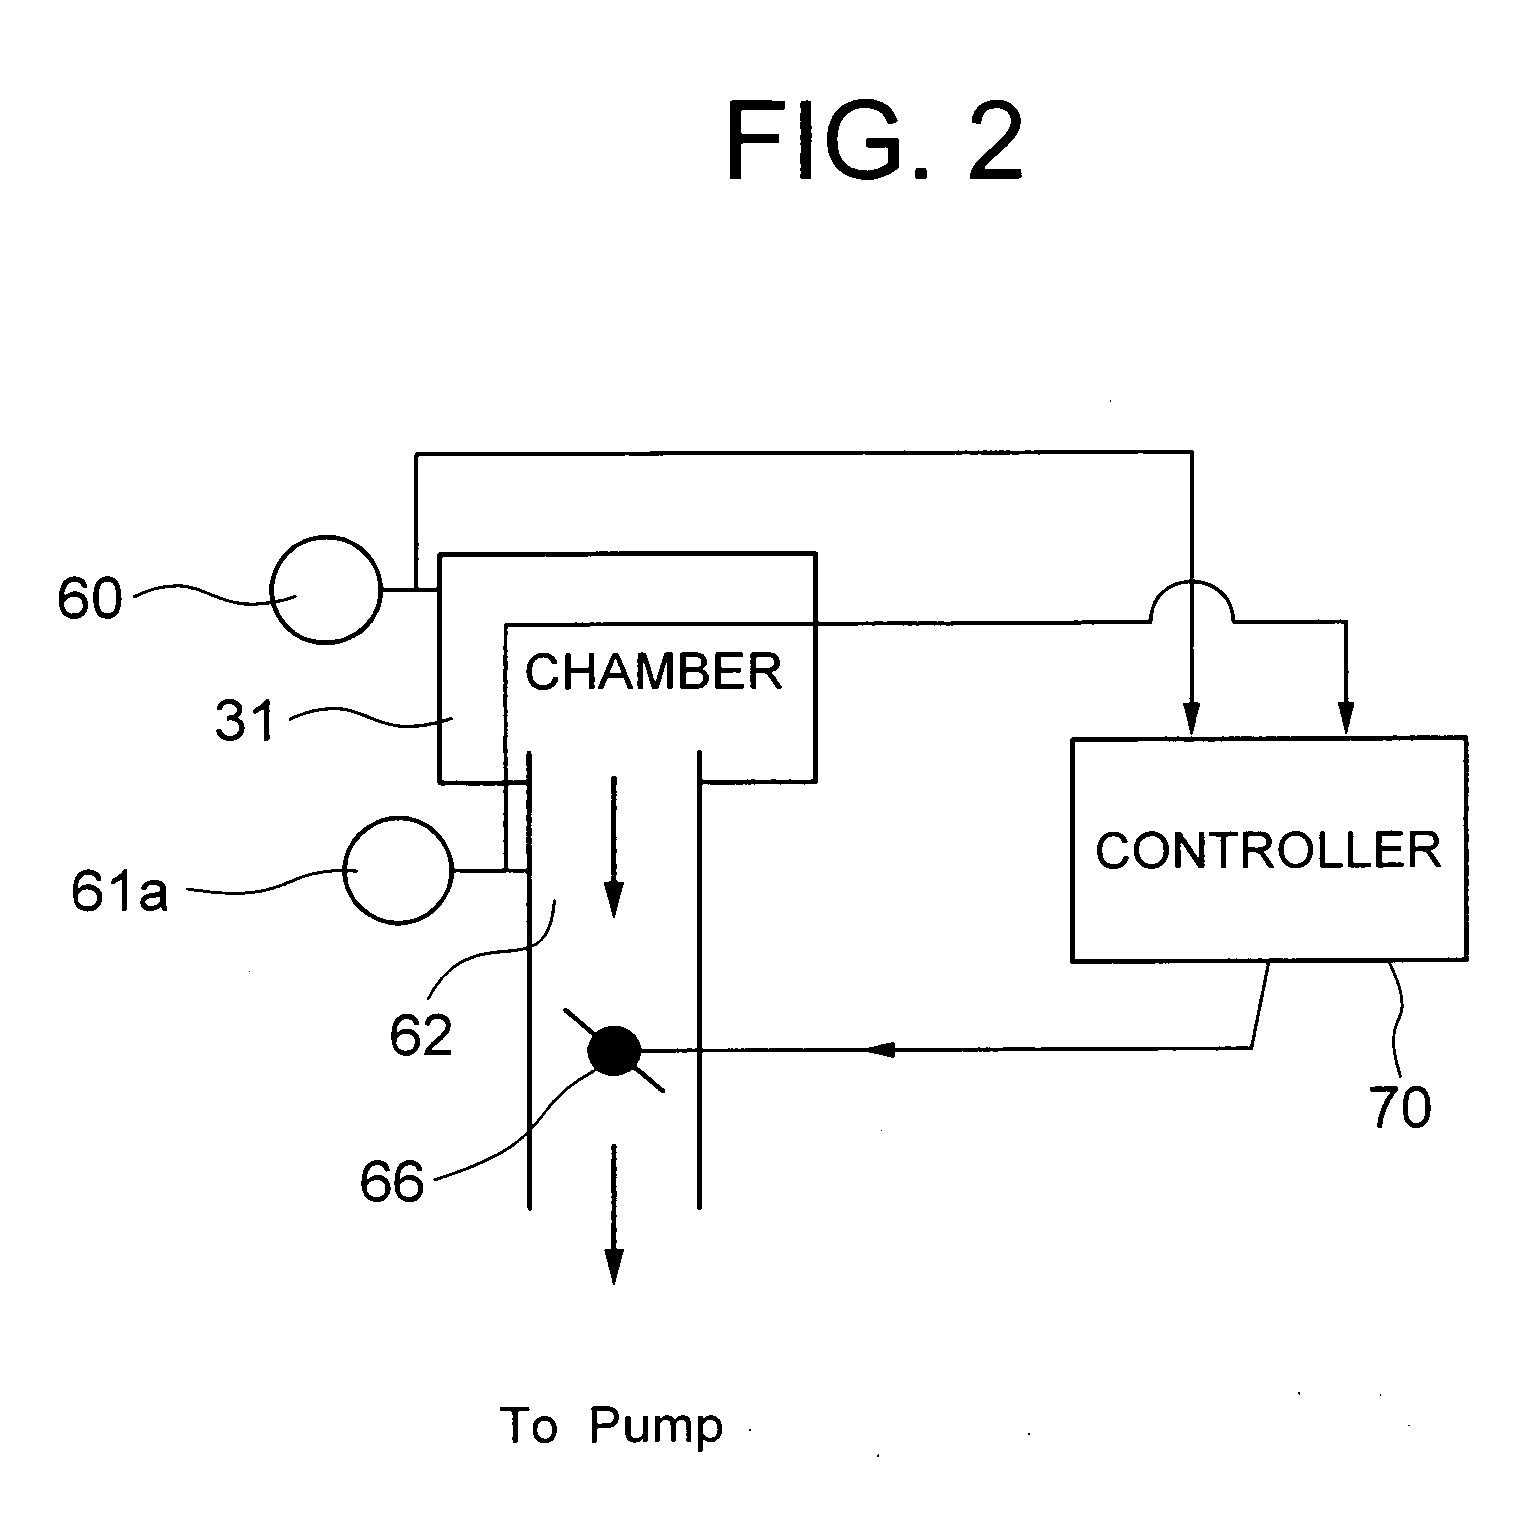 Atomic layer deposition system including a plurality of exhaust tubes